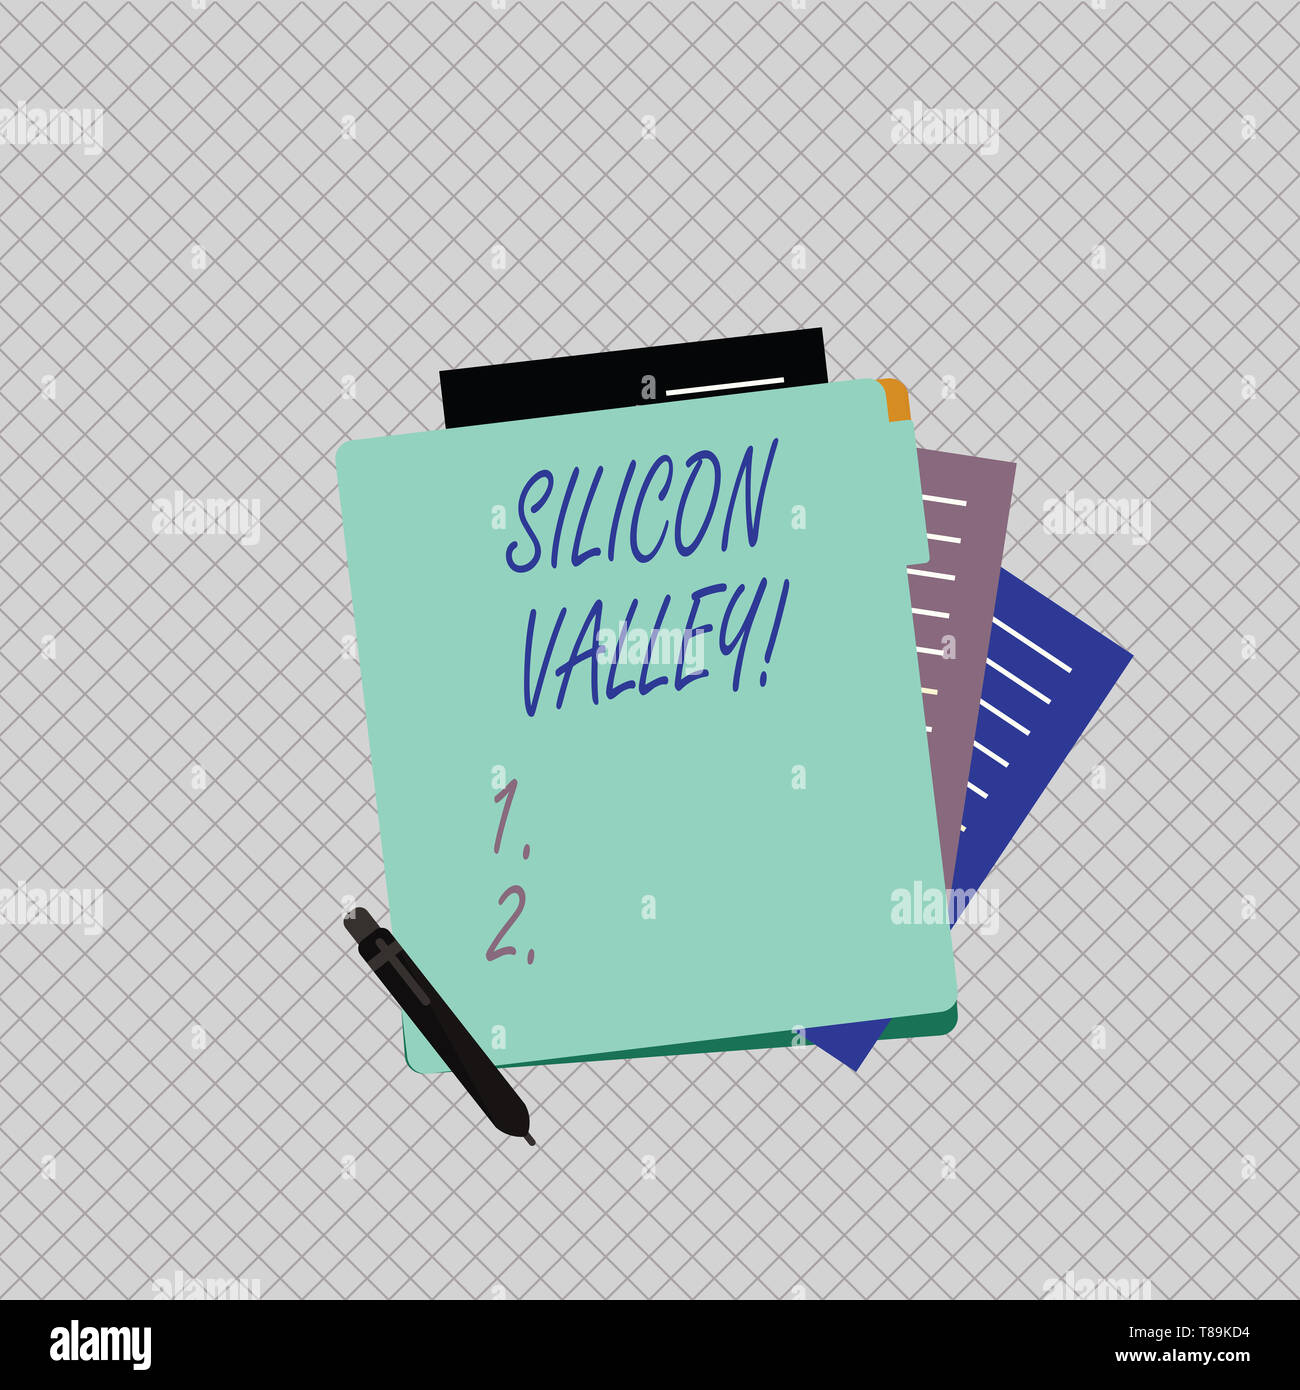 https://c8.alamy.com/comp/T89KD4/conceptual-hand-writing-showing-silicon-valley-concept-meaning-home-to-analysisy-startup-and-global-technology-companies-lined-paper-stationery-partl-T89KD4.jpg